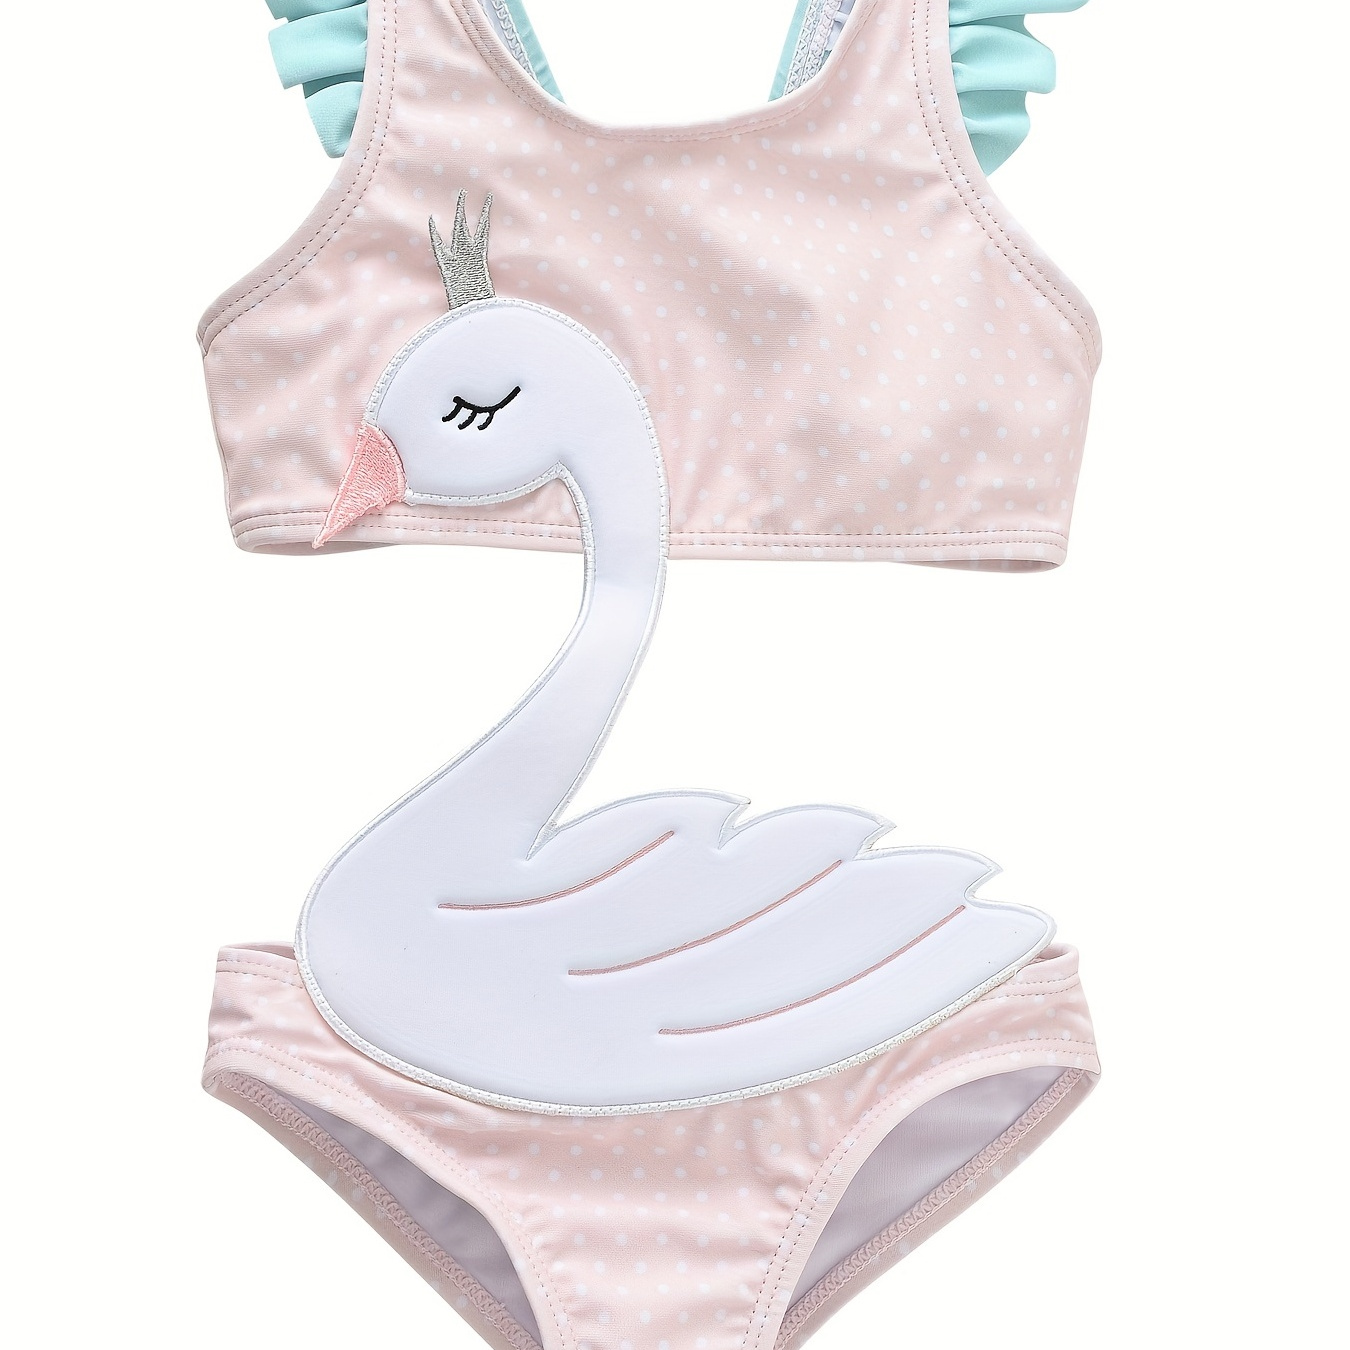 

Girls' Polka Dot Embroidered Swan Graphic Swimsuit - Trendy, Stretchy & Stylish!